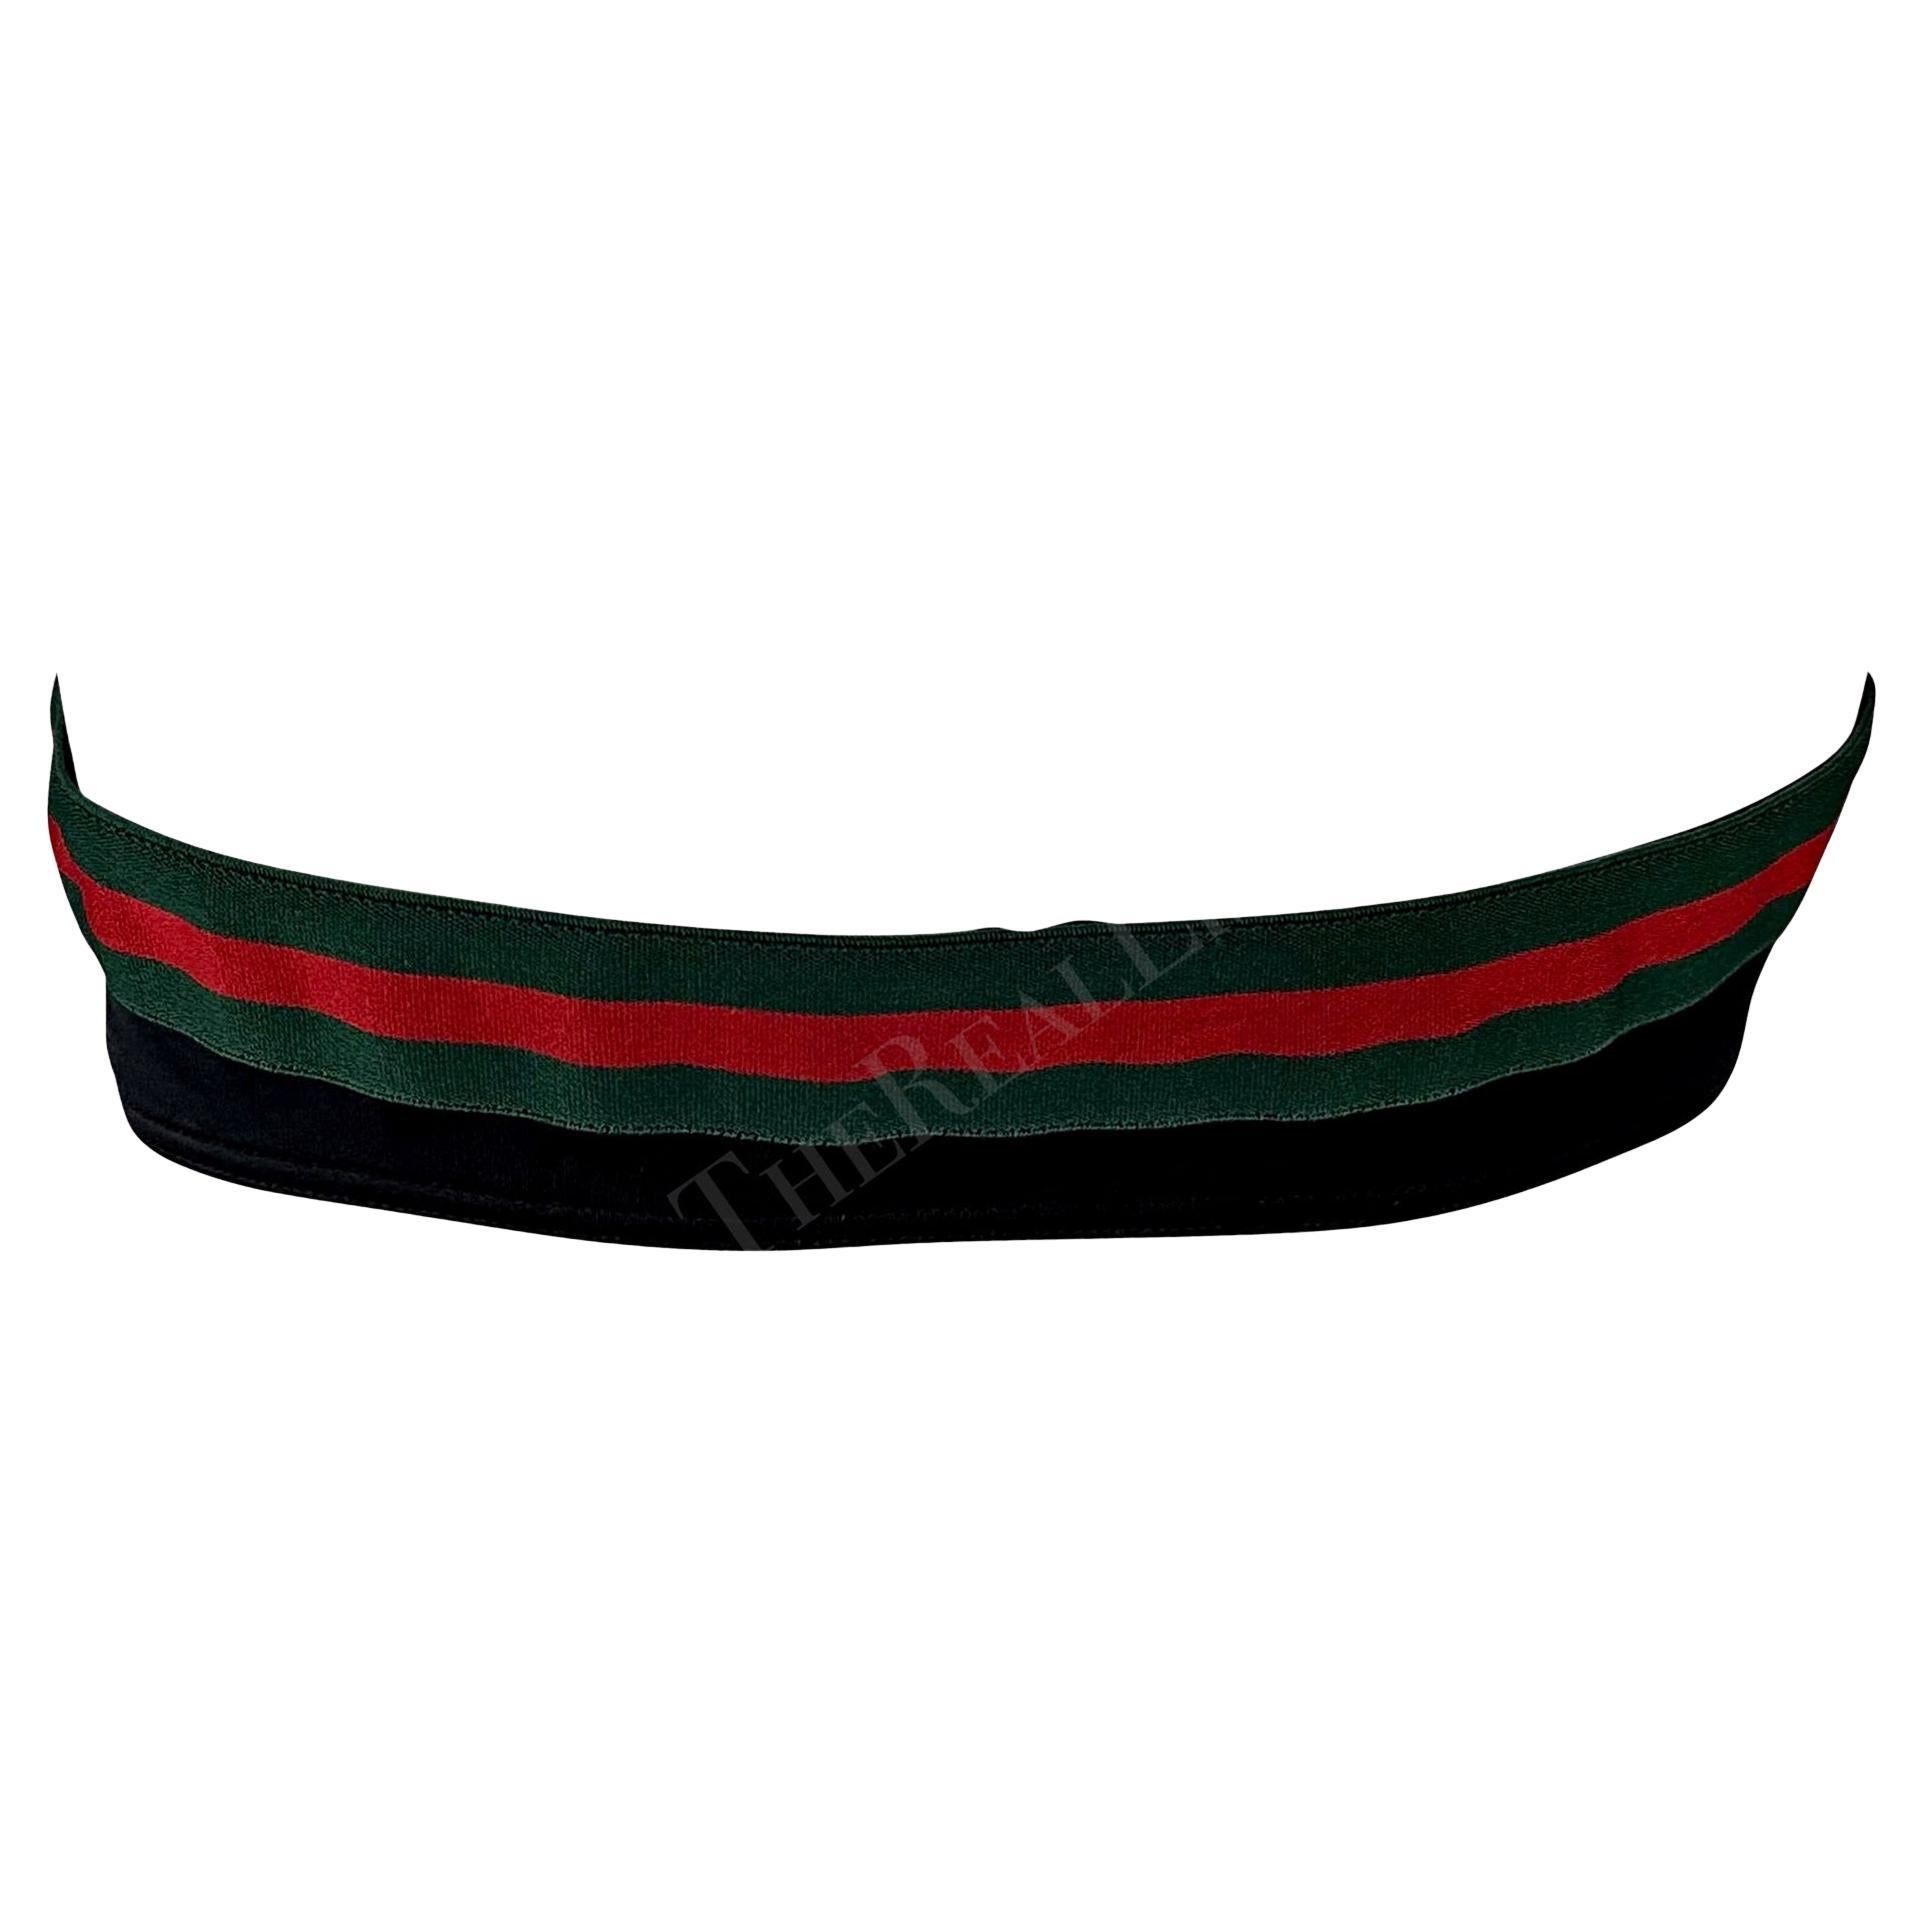 S/S 1999 Gucci by Tom Ford Green Red Stripe Black Stretch Bandeaux Bikini Top In Excellent Condition For Sale In West Hollywood, CA